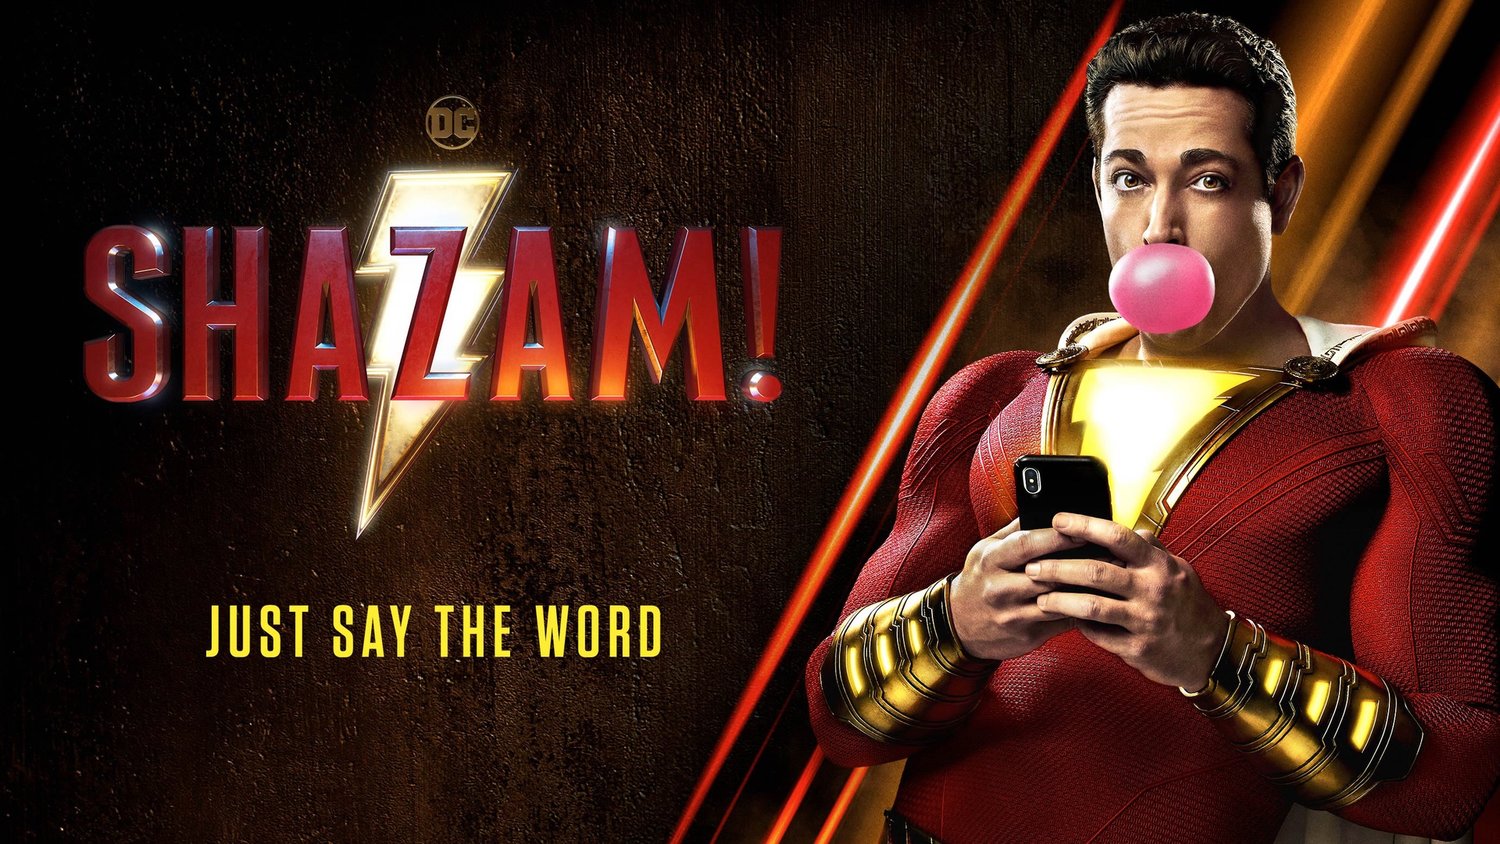 The SHAZAM! Superhero Suit Cost up to $1 Million to Create and the Director Explains Why